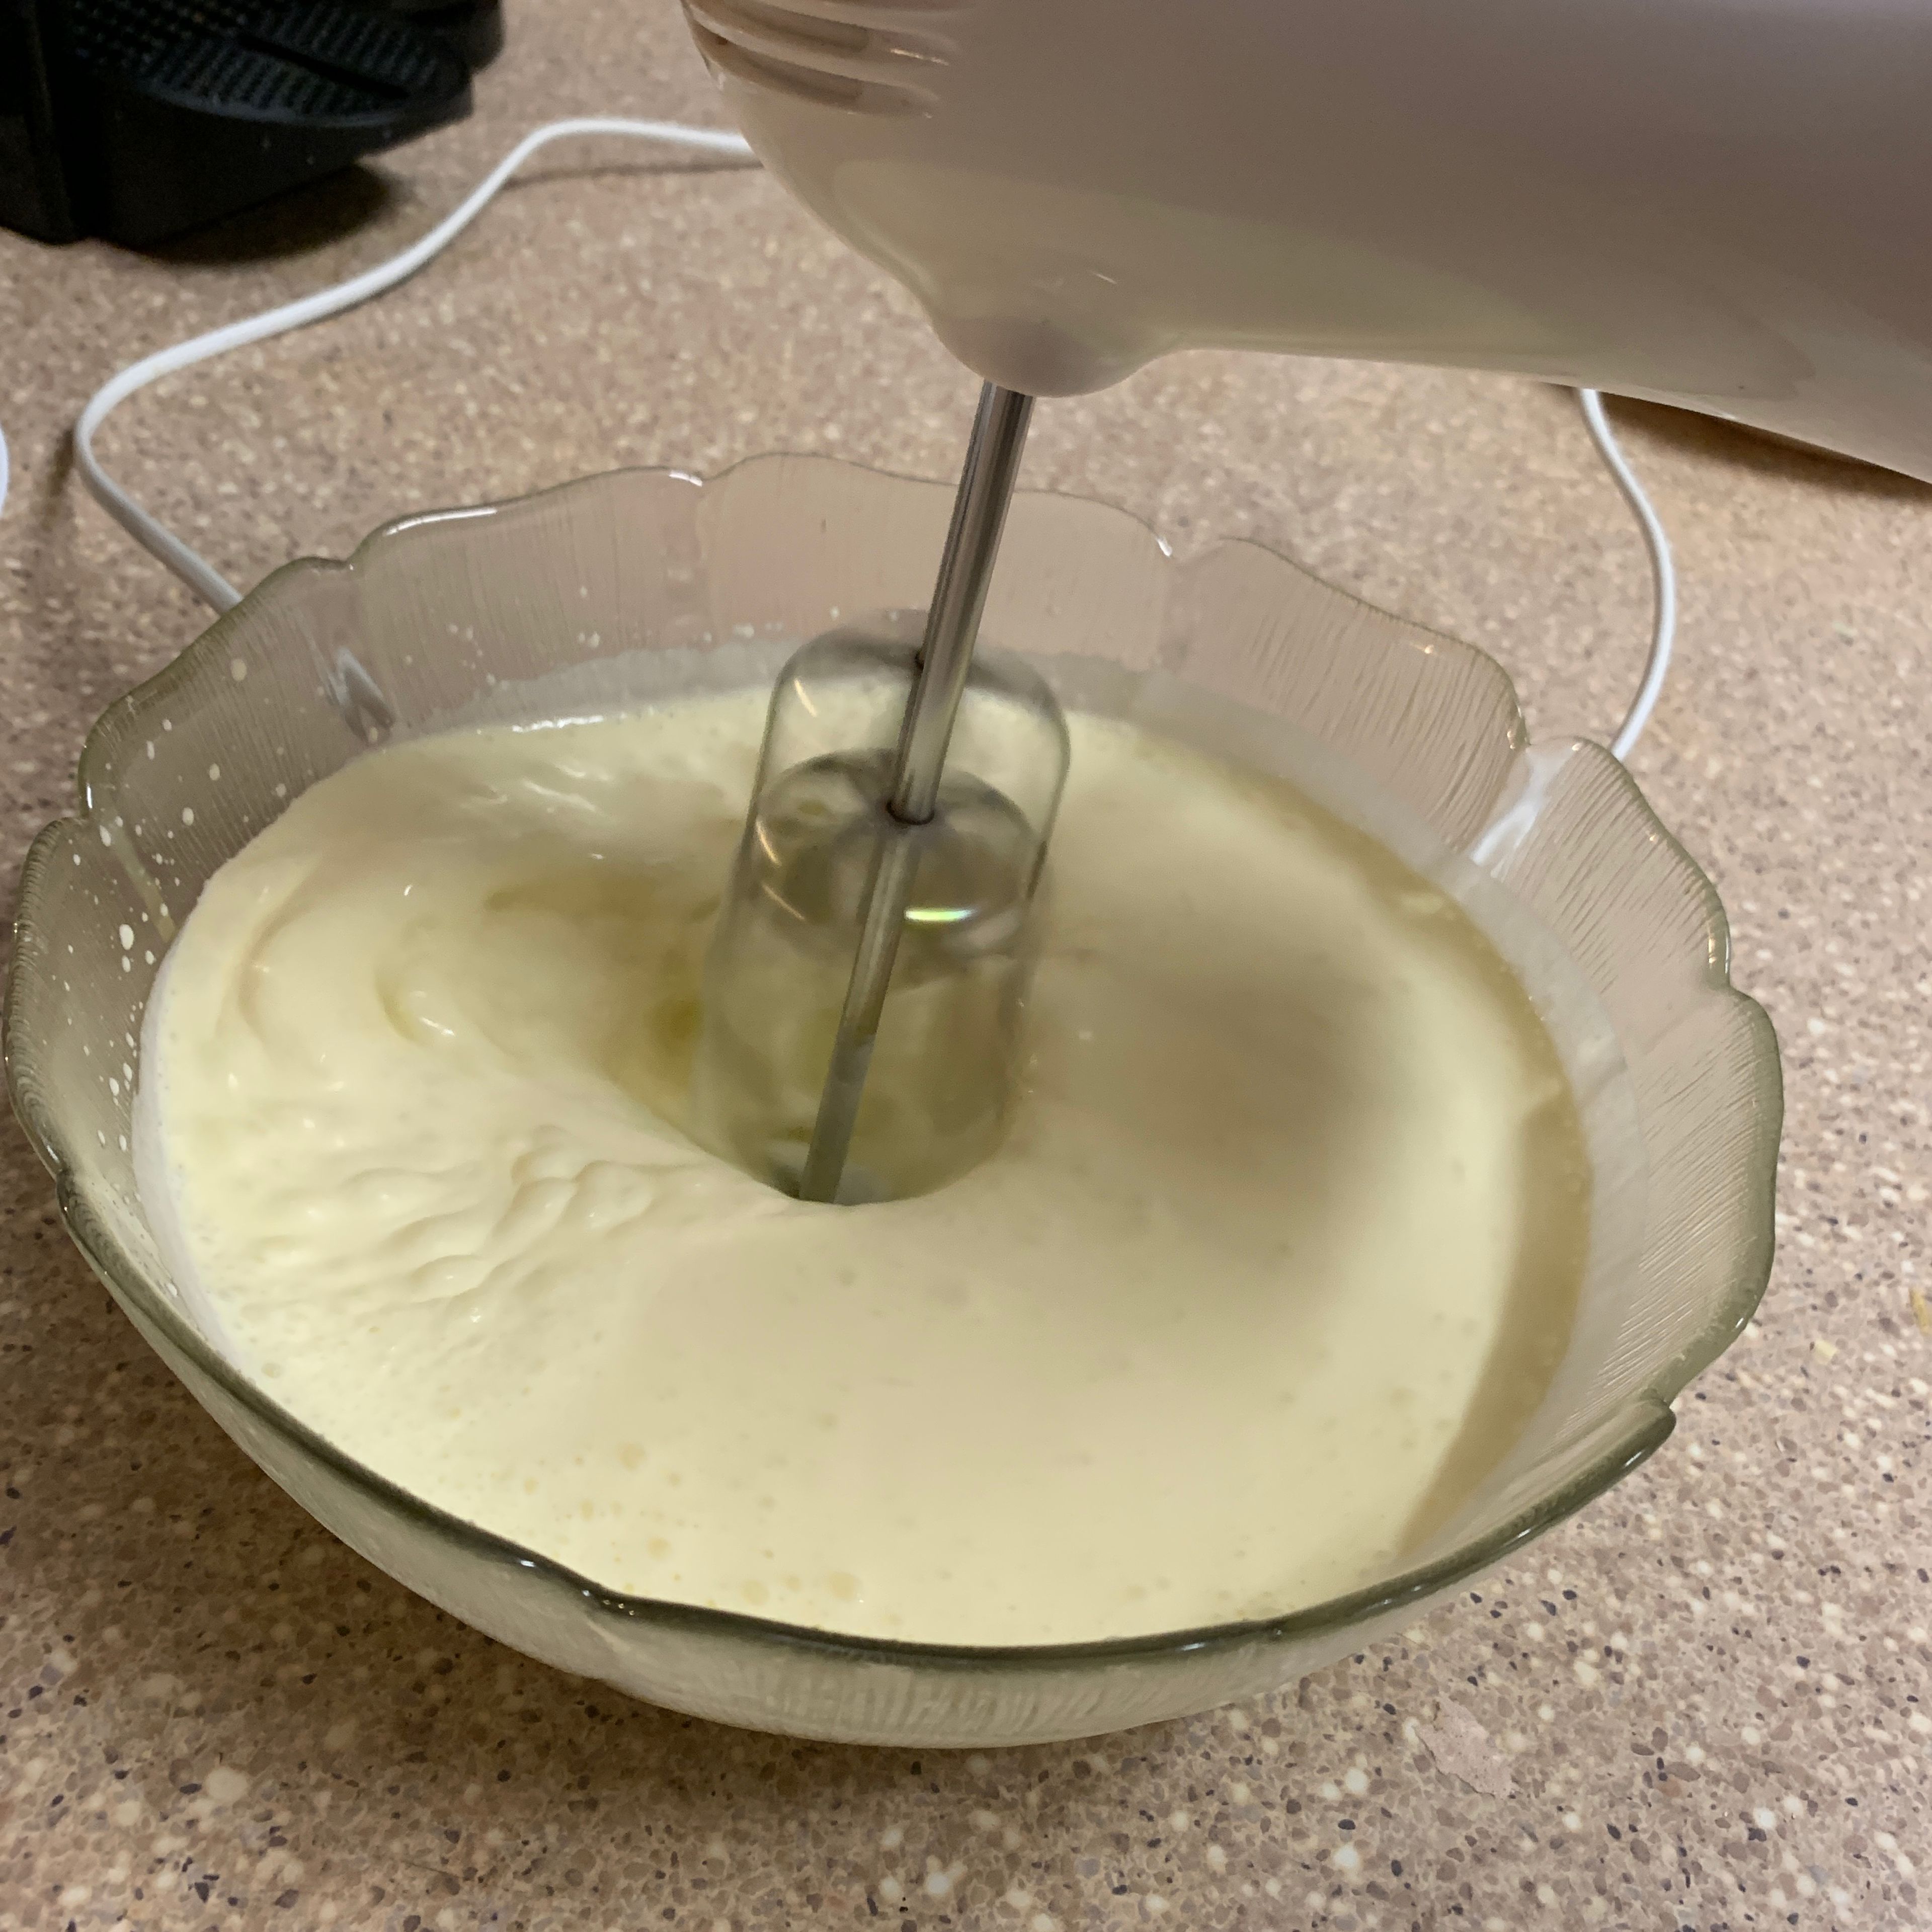 Add the remaining sugar (55g) and cream together and whipped until soft peak